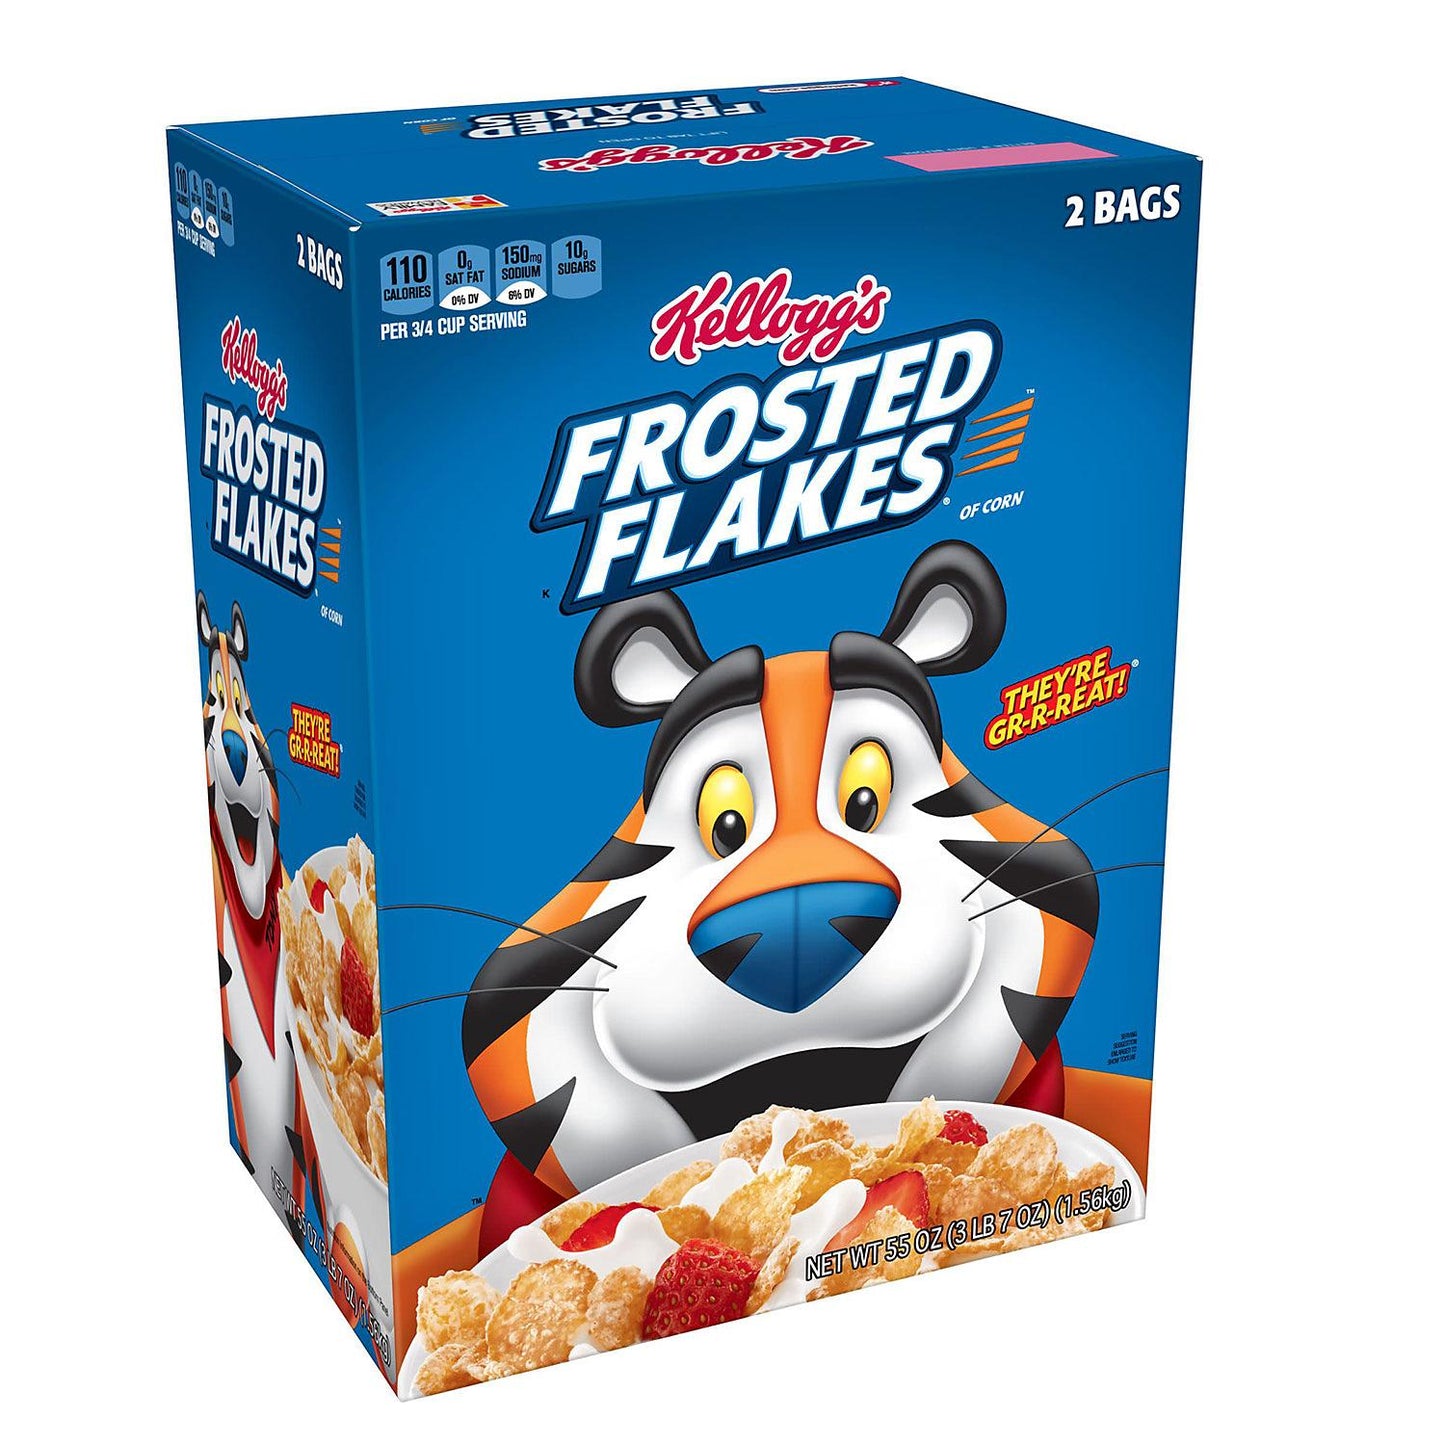 Frosted Flakes.jpg